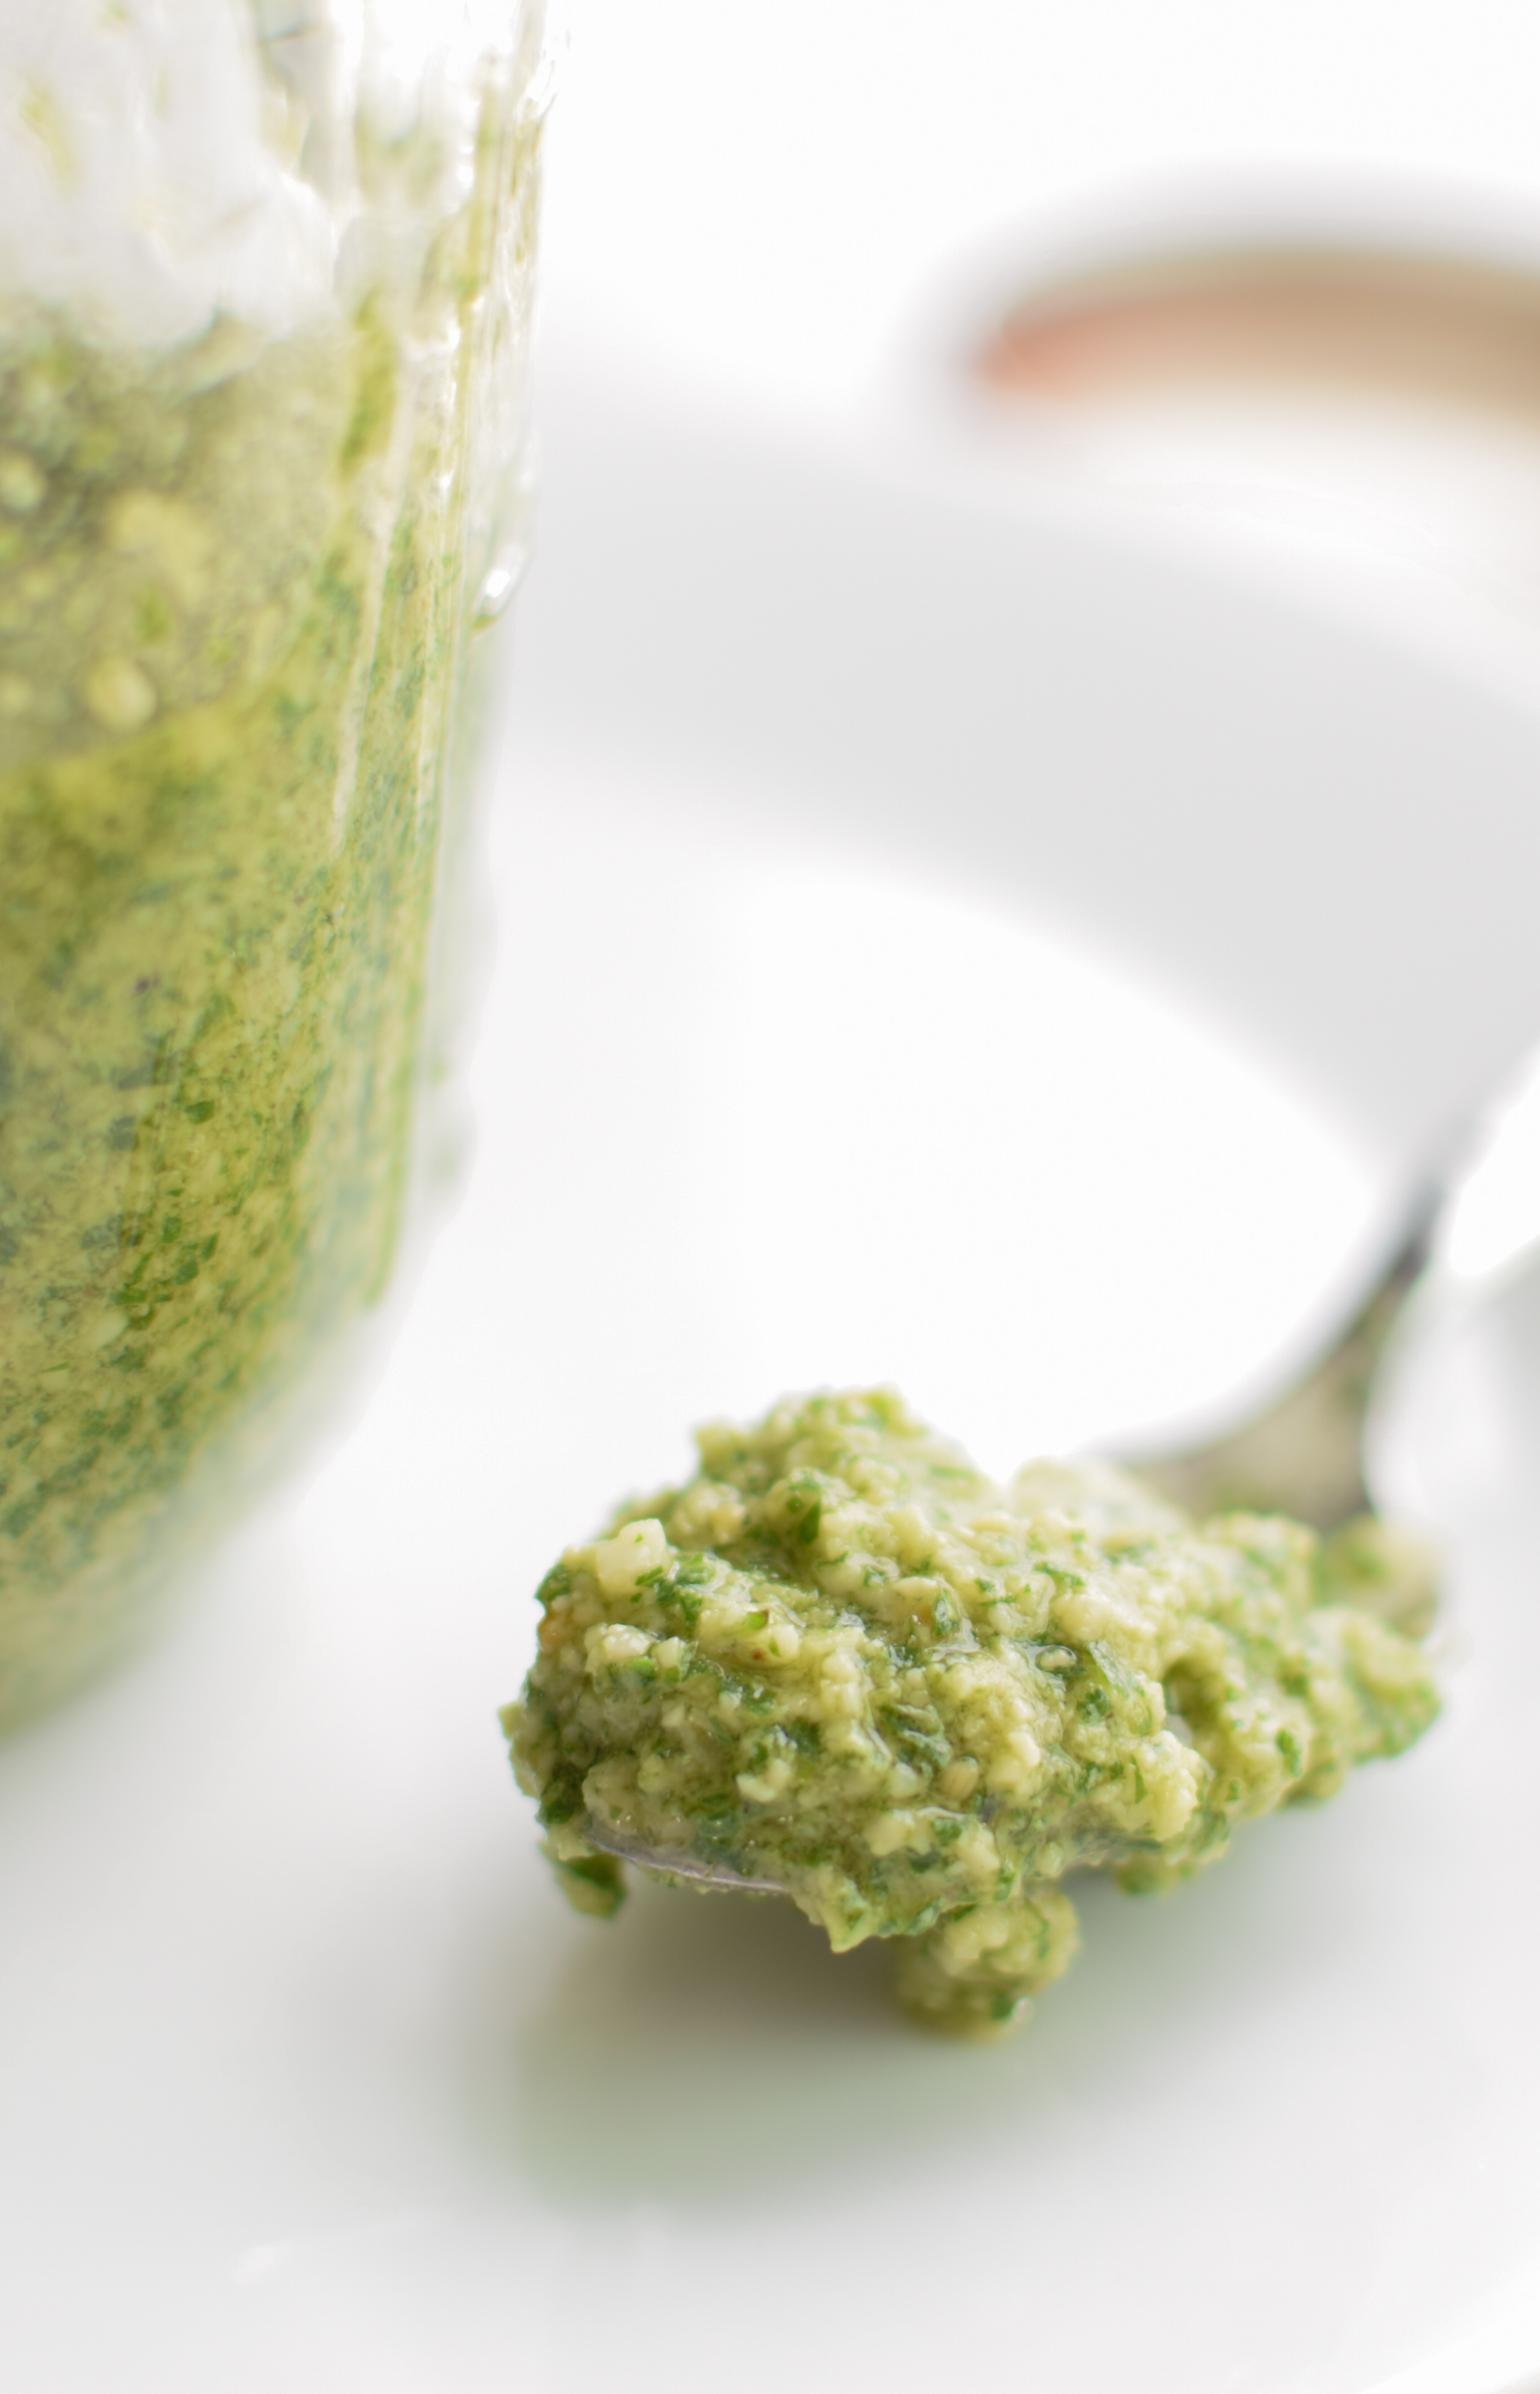 Store-Bought Vs. Homemade Pesto: Which is Cheaper?